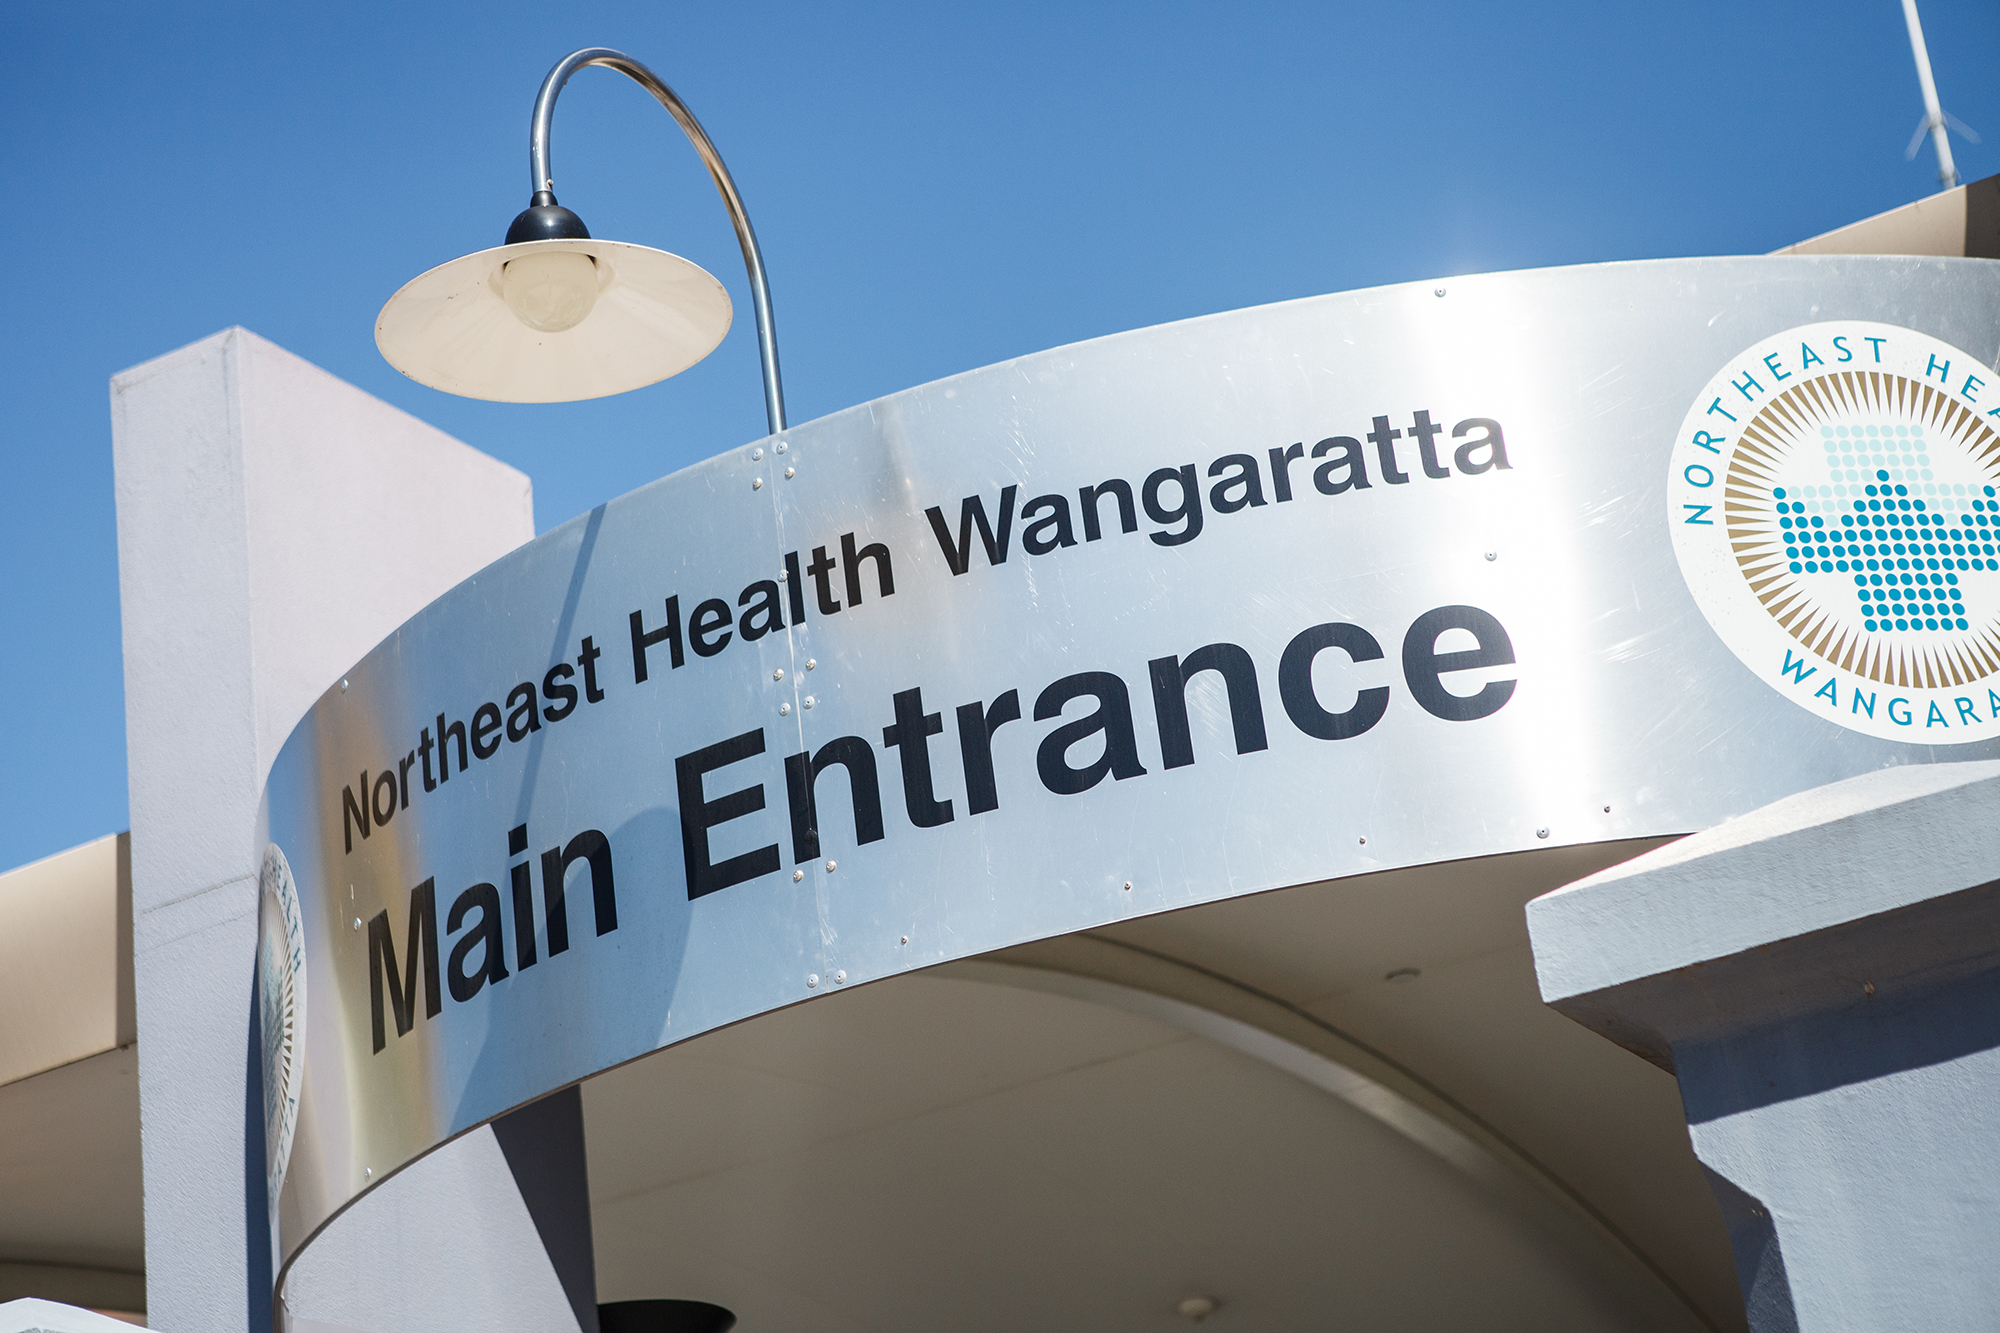 Northeast Health Wangaratta welcome sign about the front entrance